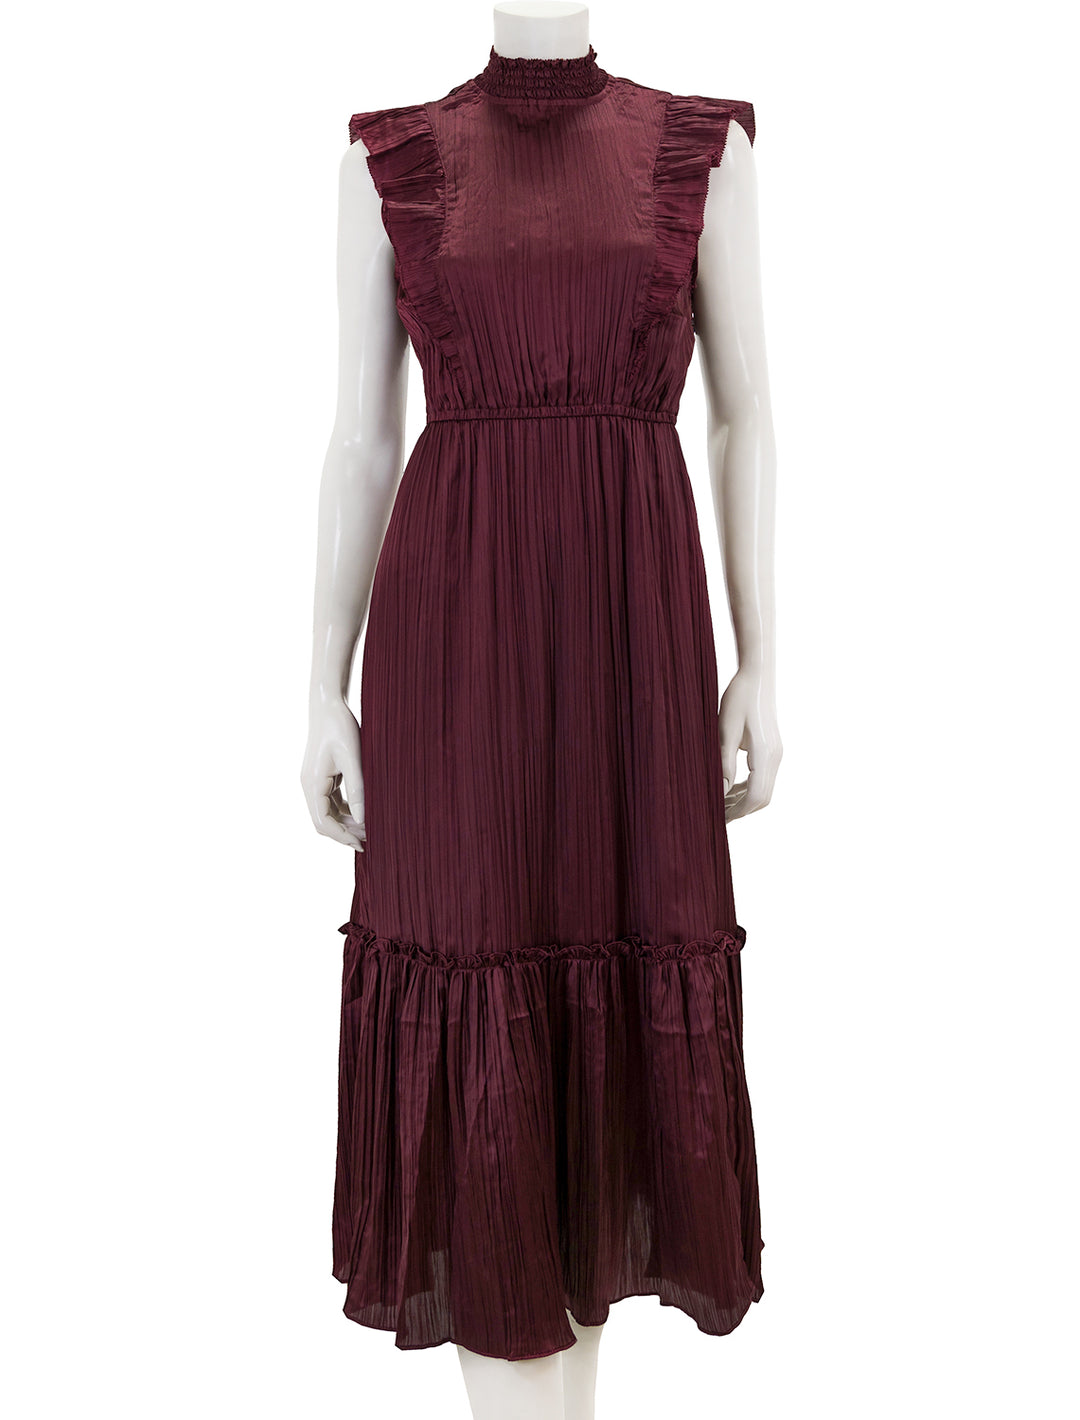 Front view of Steve Madden's wednesday dress in wine.